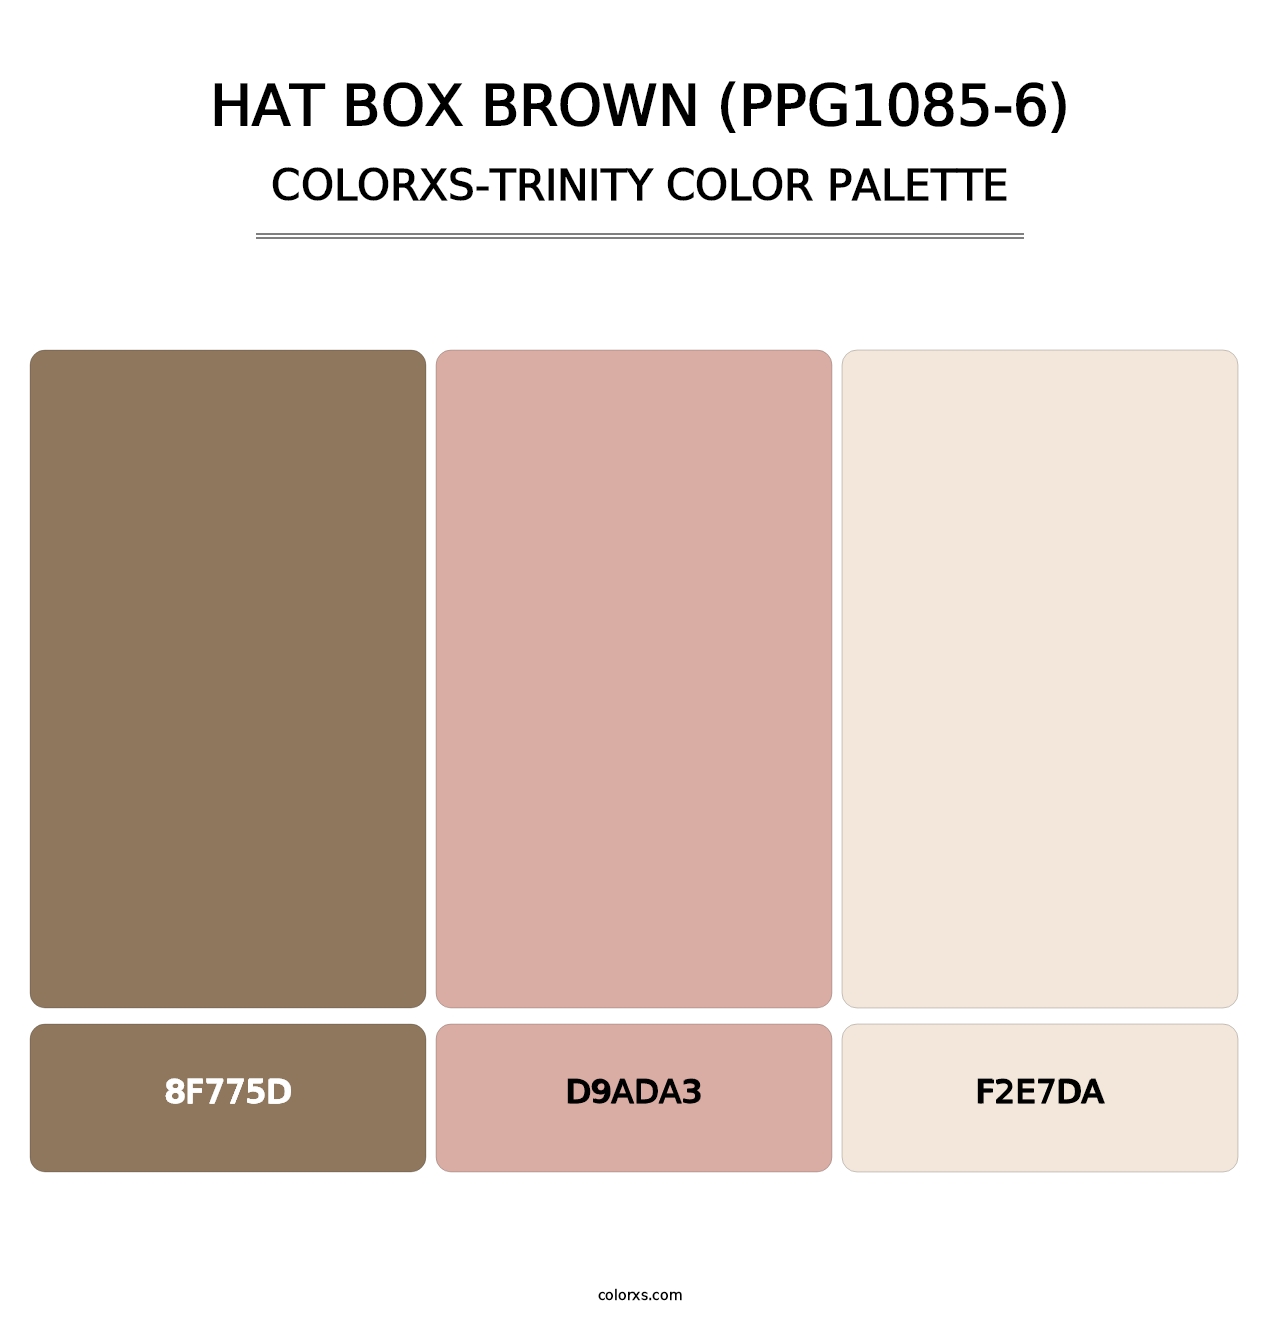 Hat Box Brown (PPG1085-6) - Colorxs Trinity Palette